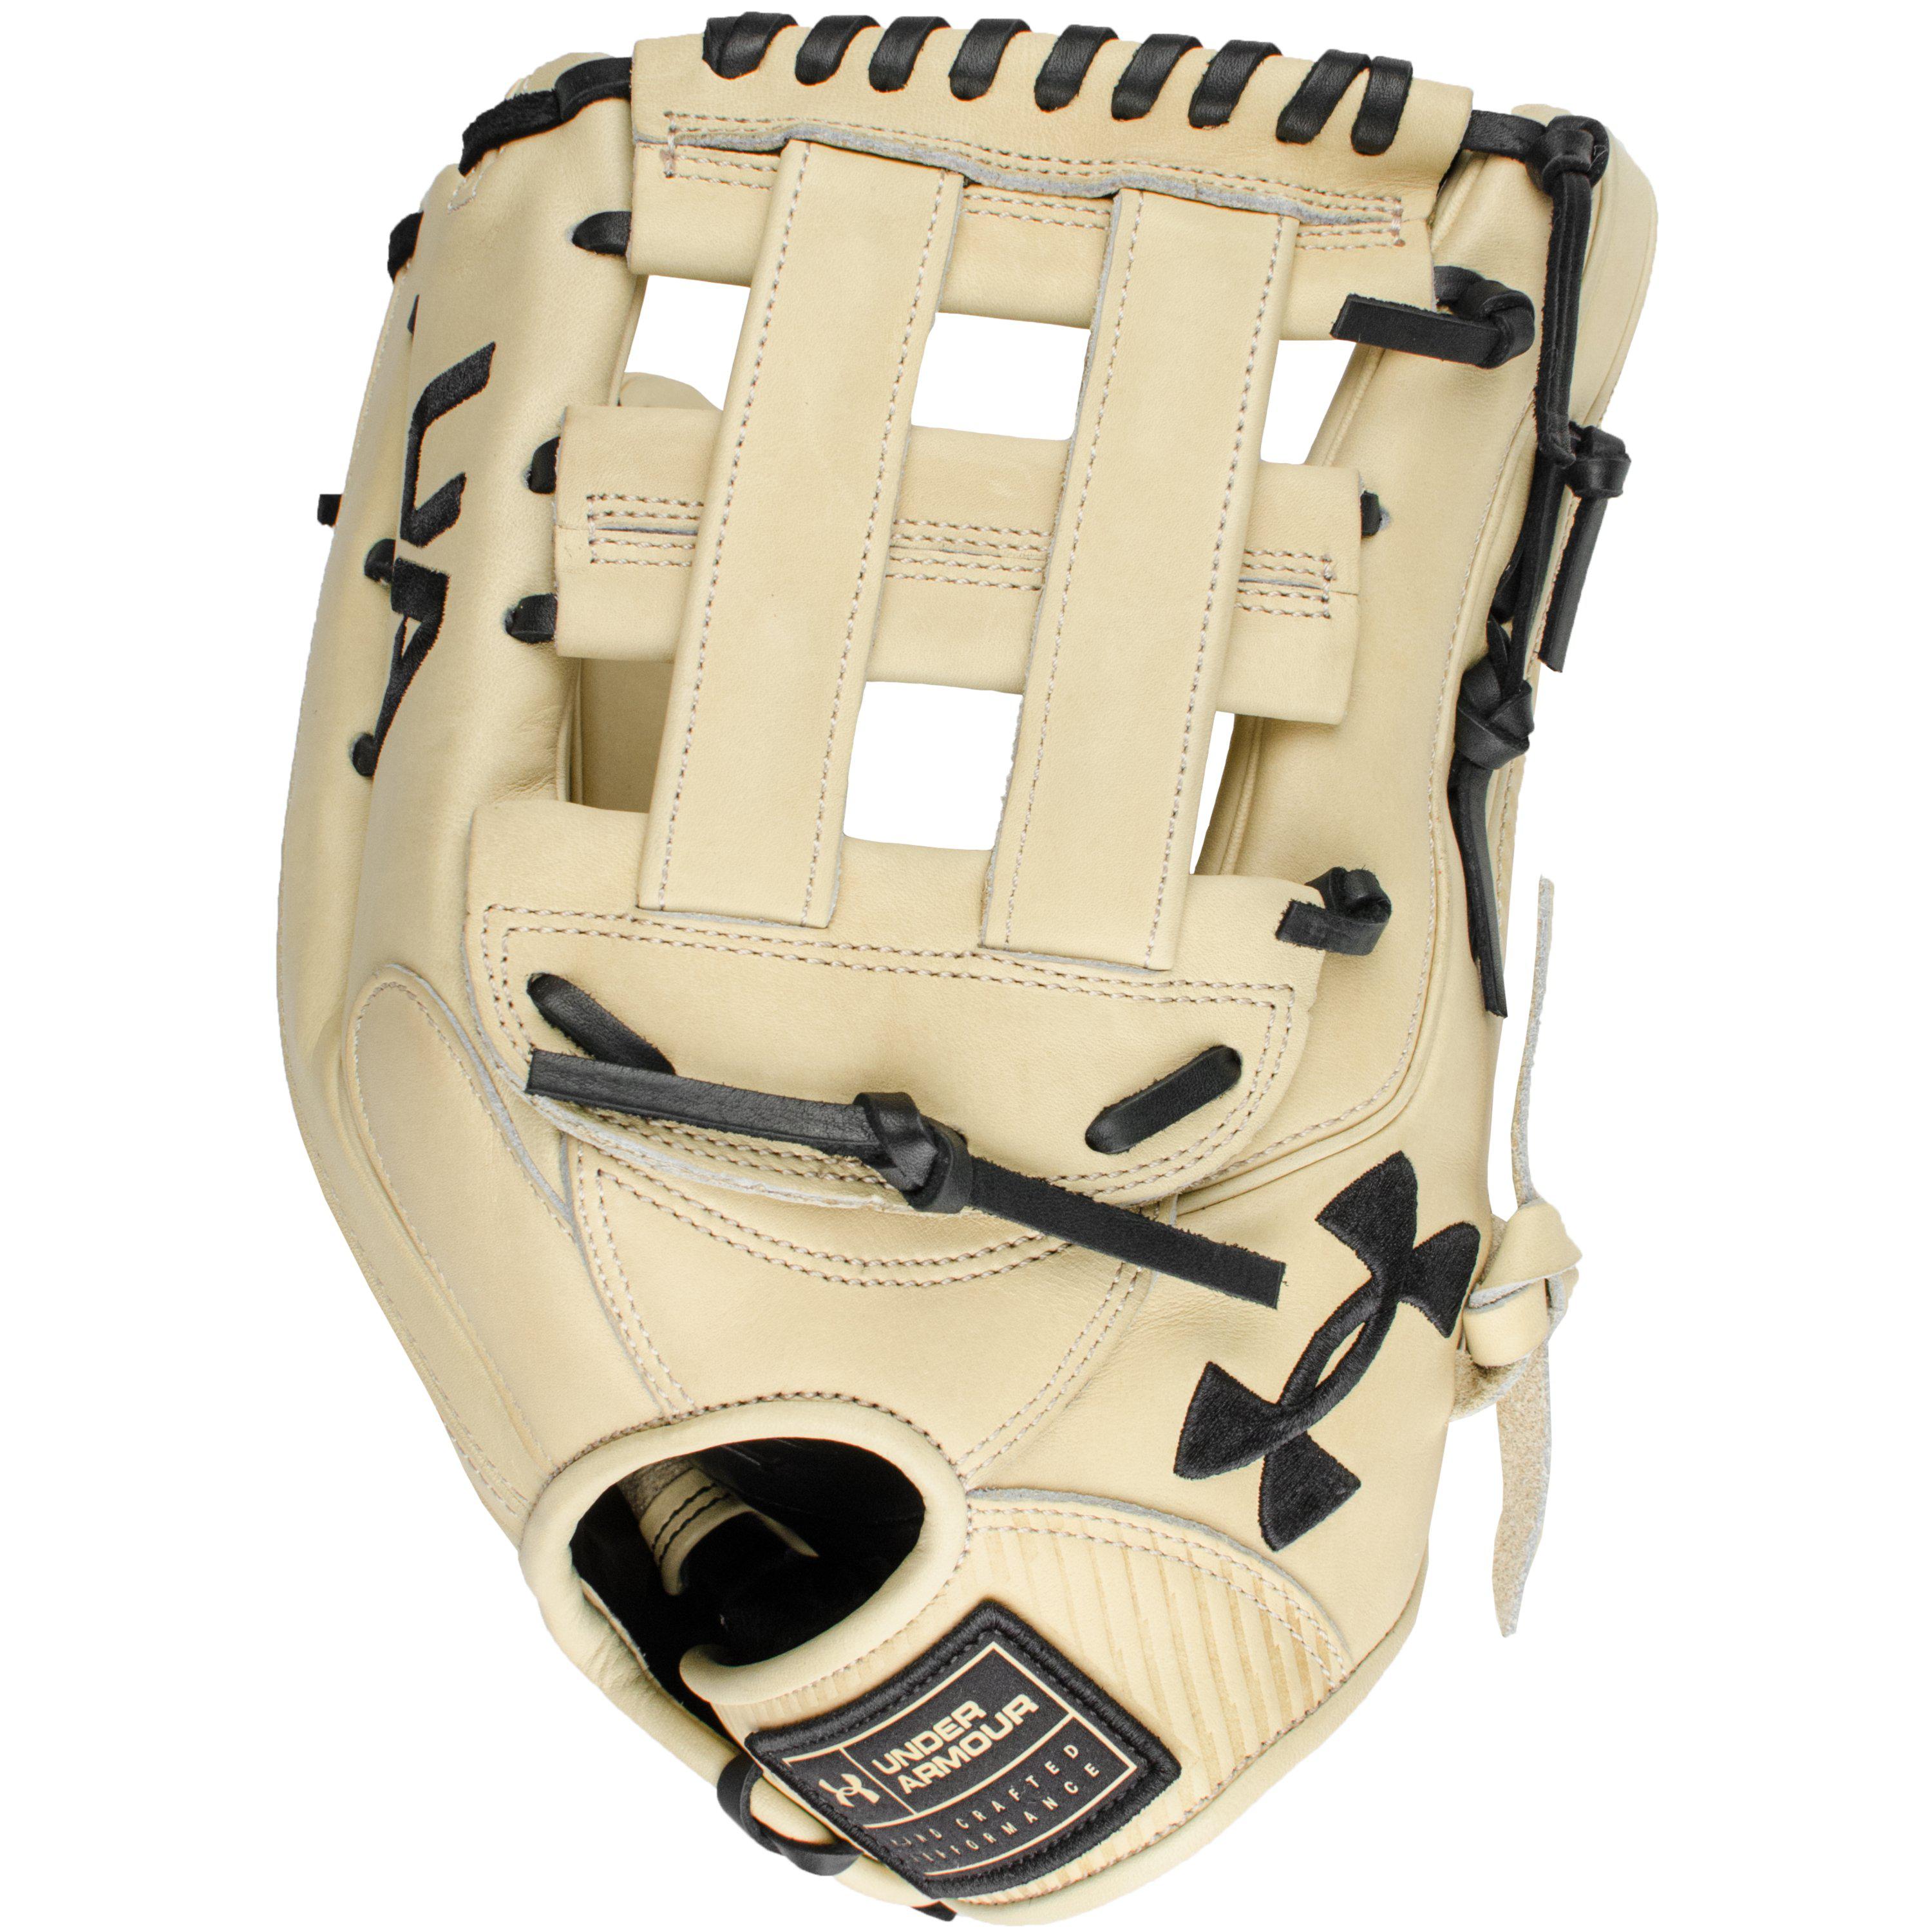 Under Armour Leather Ua Flawless 12.75 